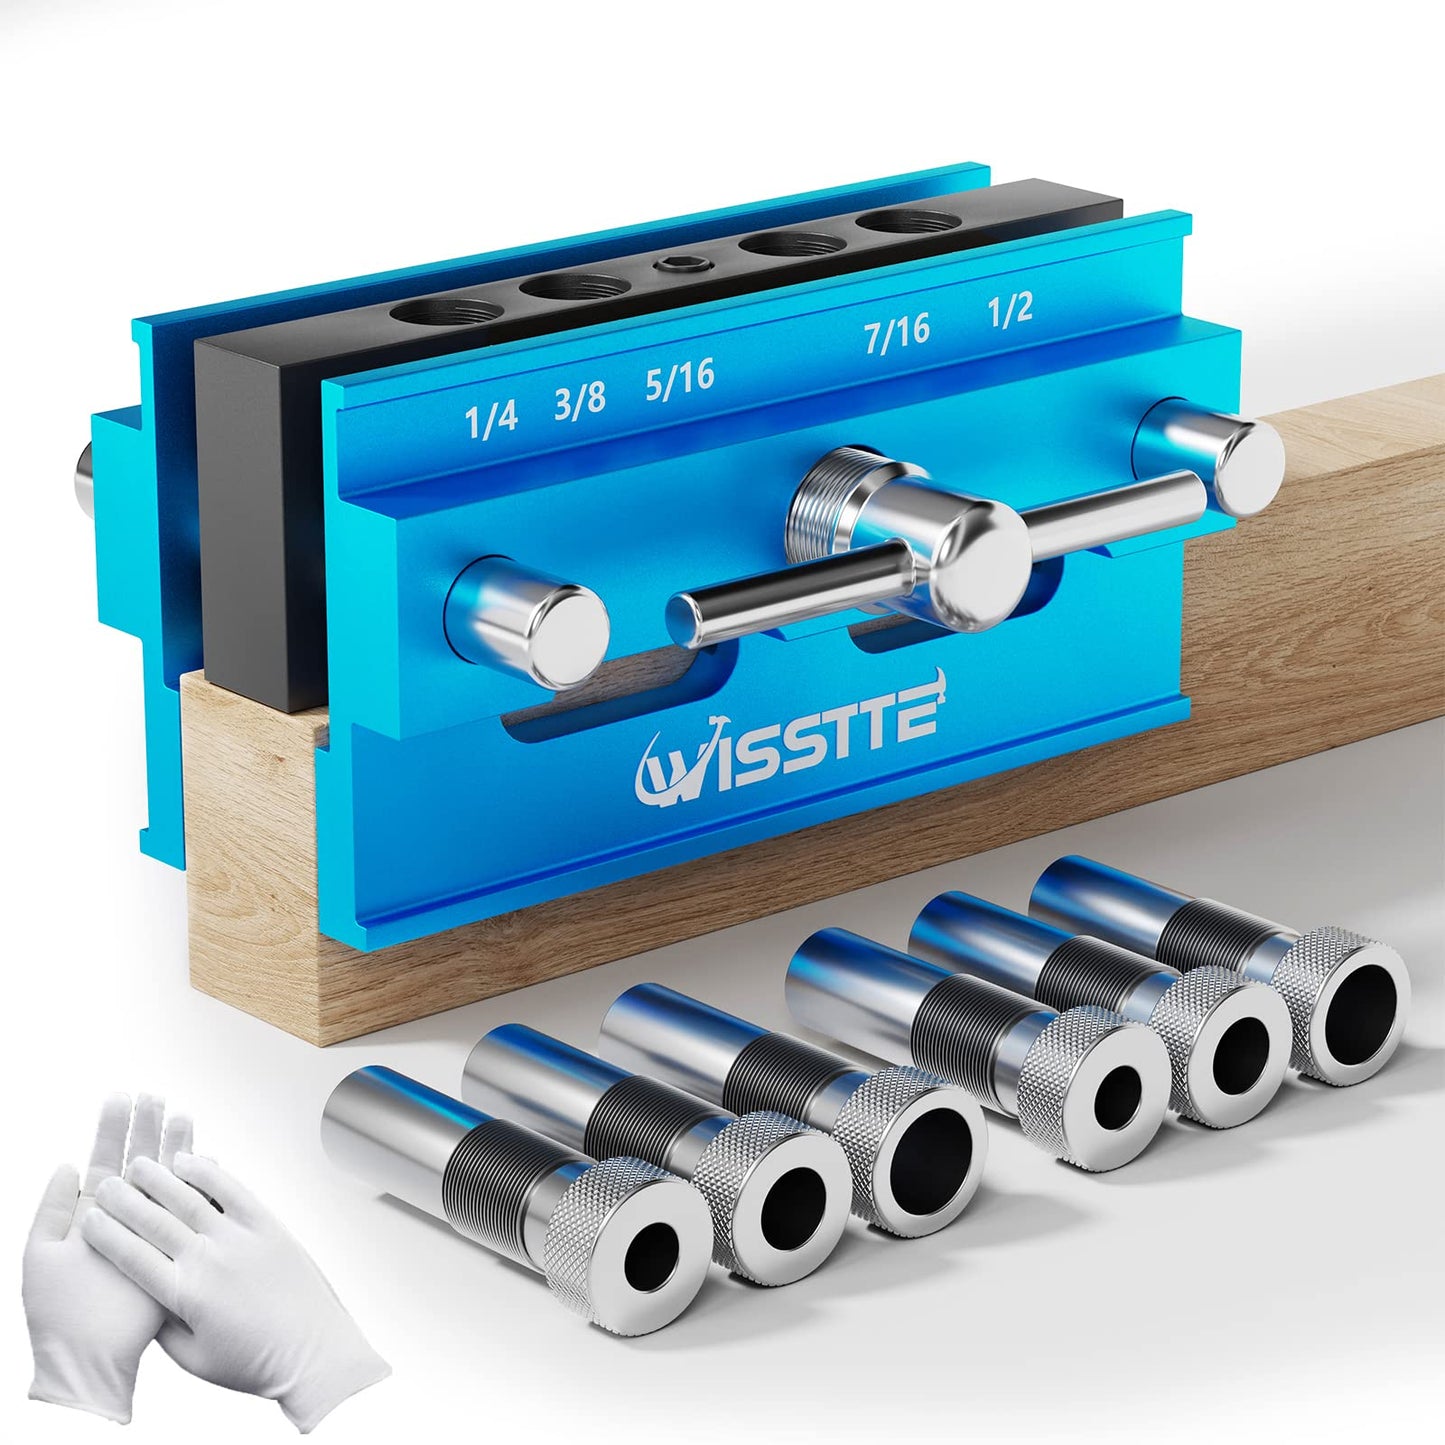 WISSTTE self centering dowel jig For Straight Holes Biscuit Joiner Set,doweling jig self centering kit With 6 Drill Guide Bushings,dowling jig for